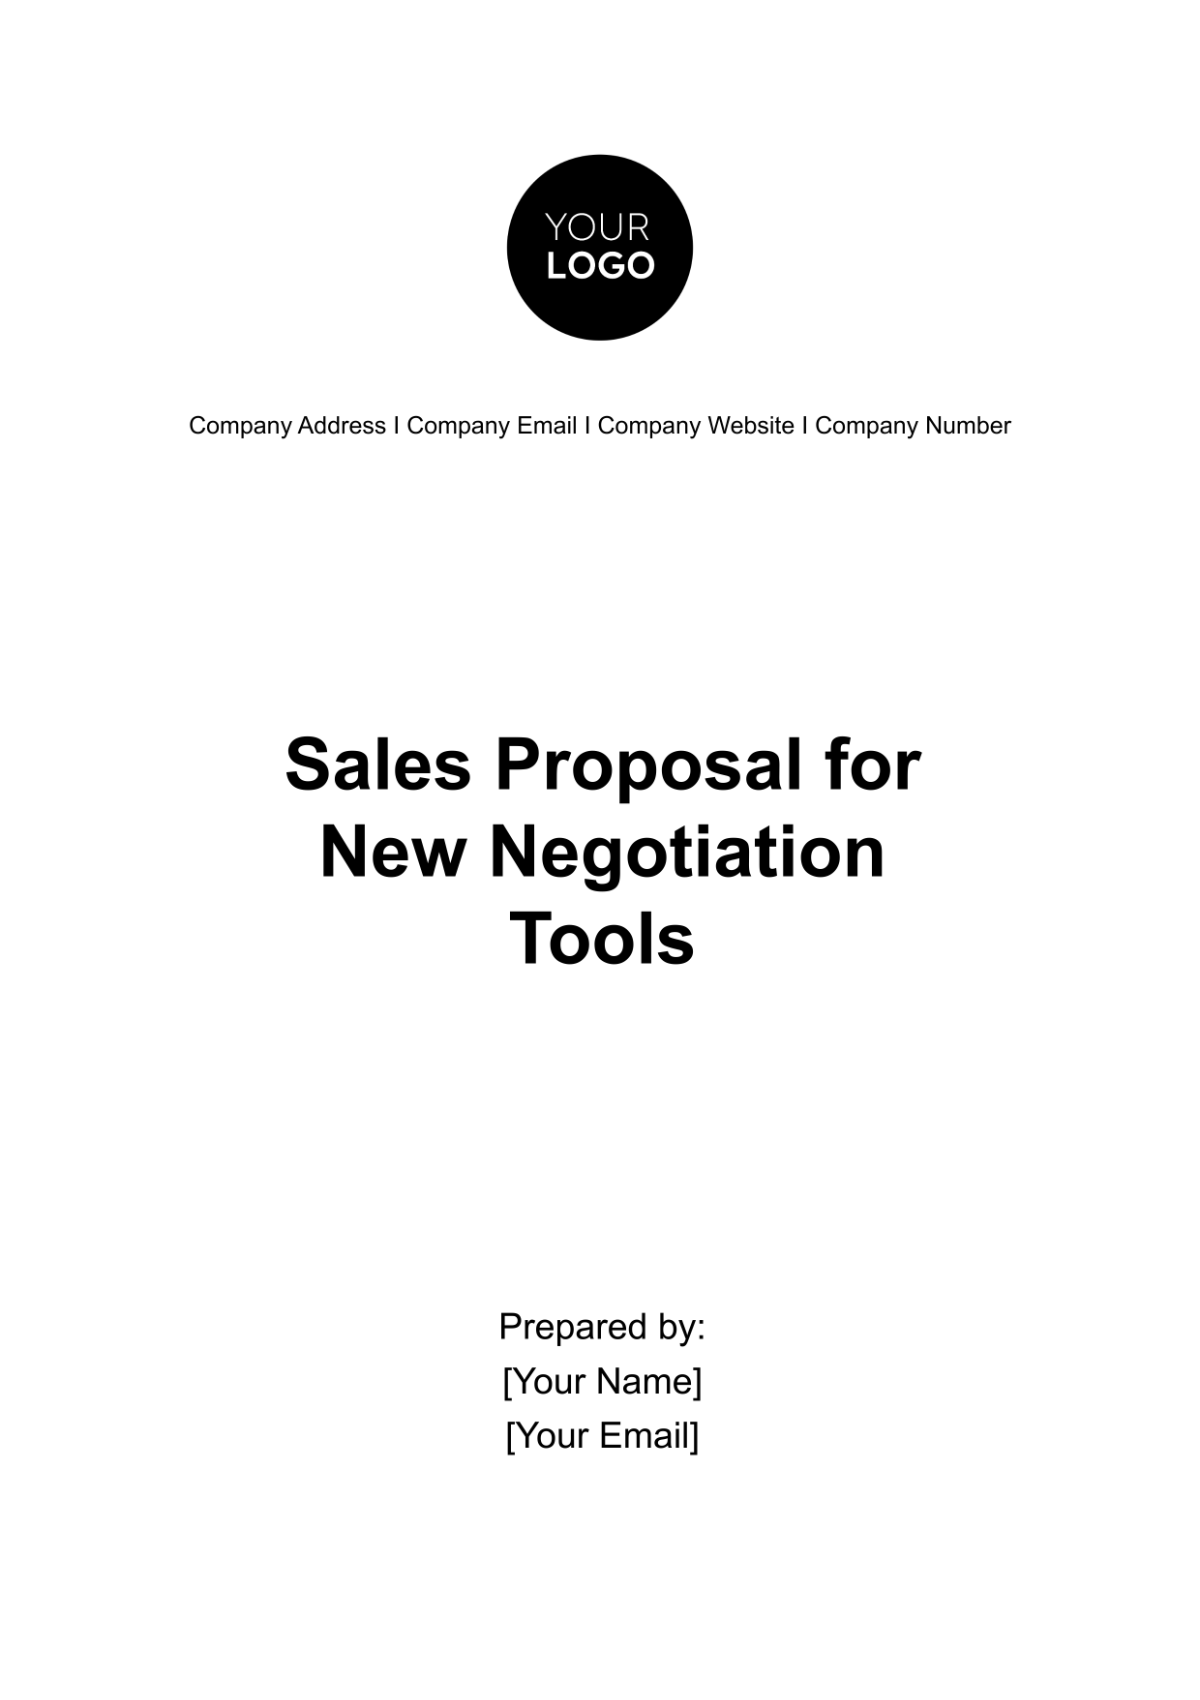 Sales Proposal for New Negotiation Tools Template